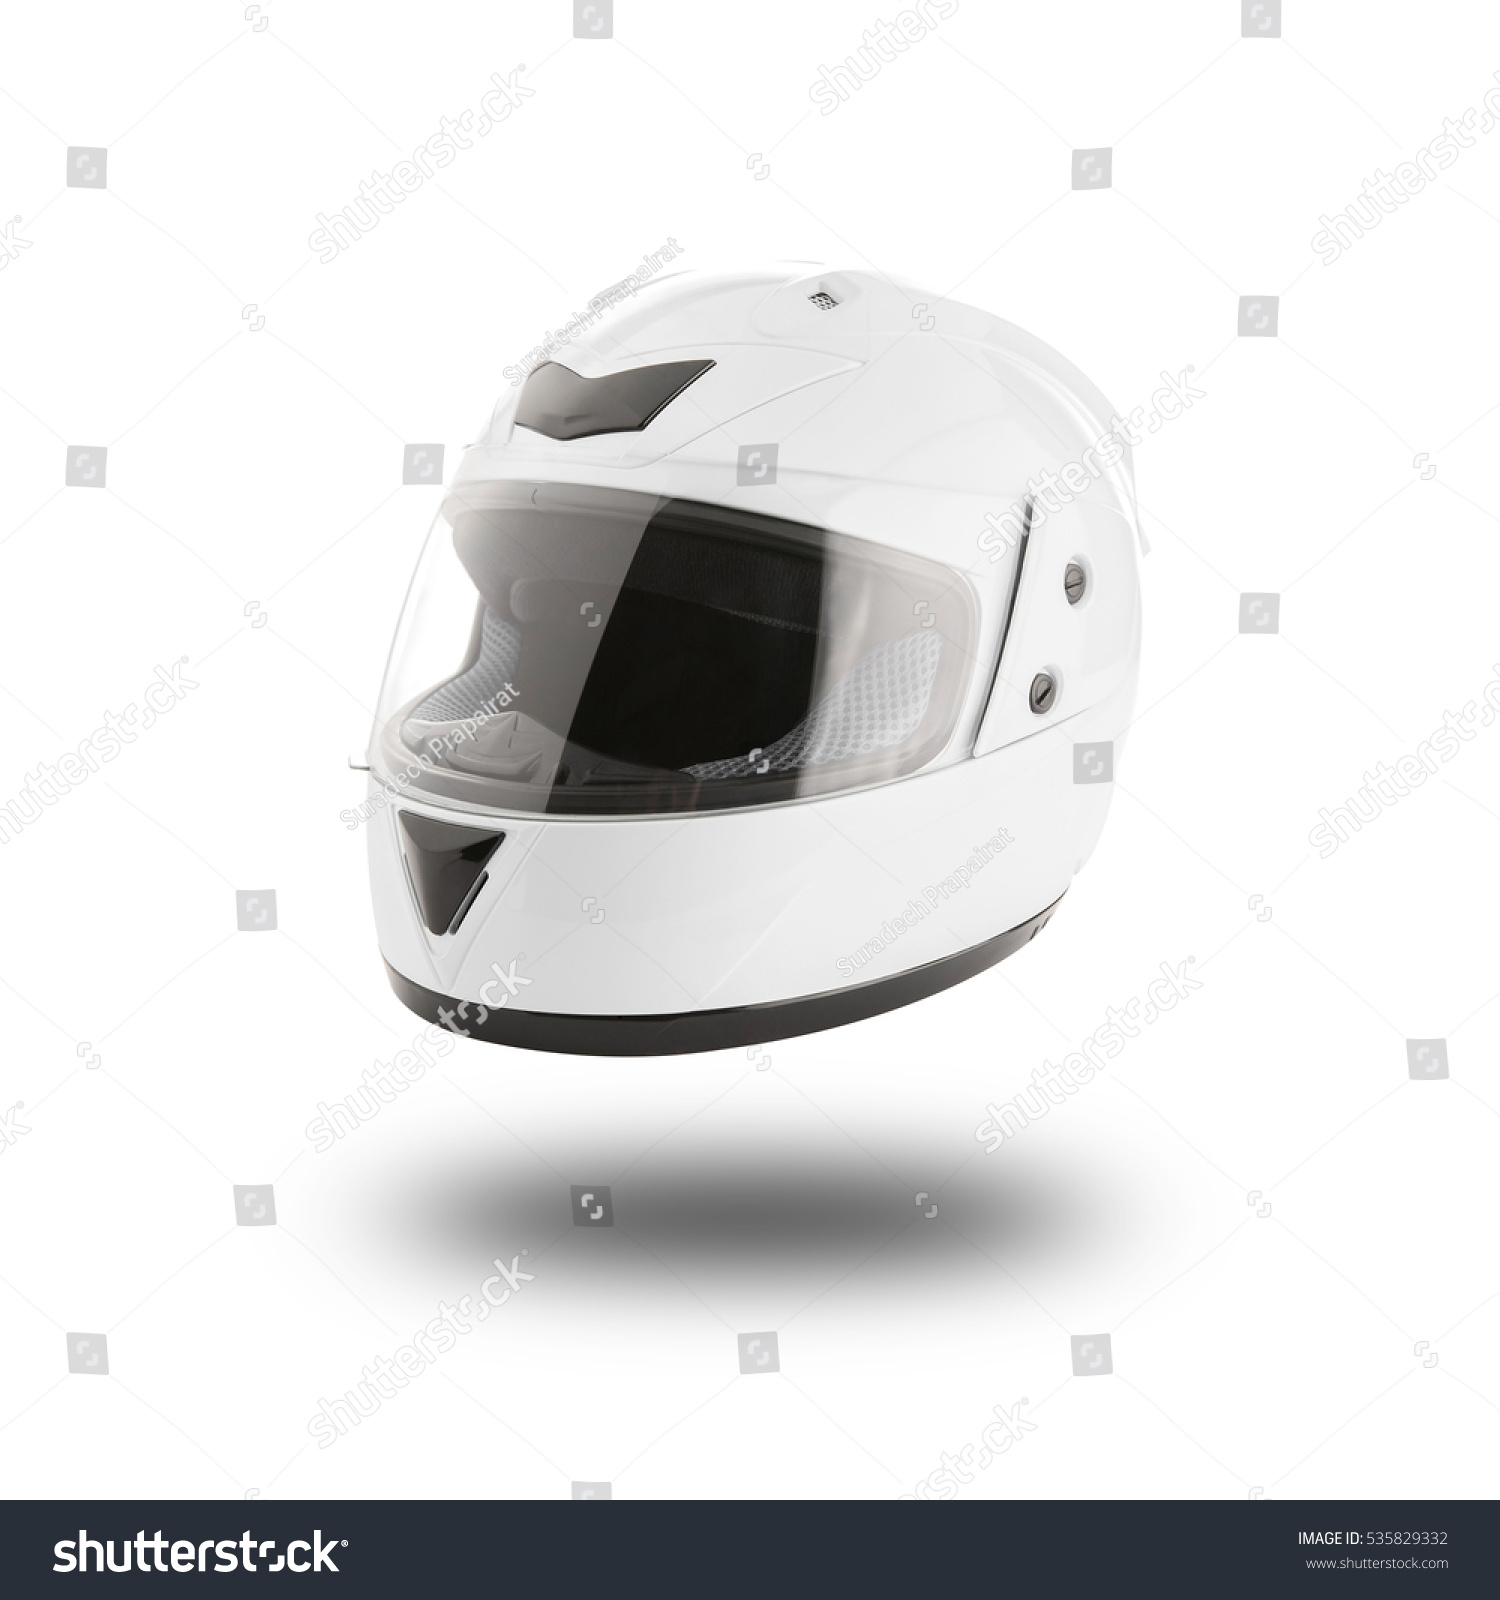 Motorcycle helmet over isolate on white background with clipping path

 #535829332